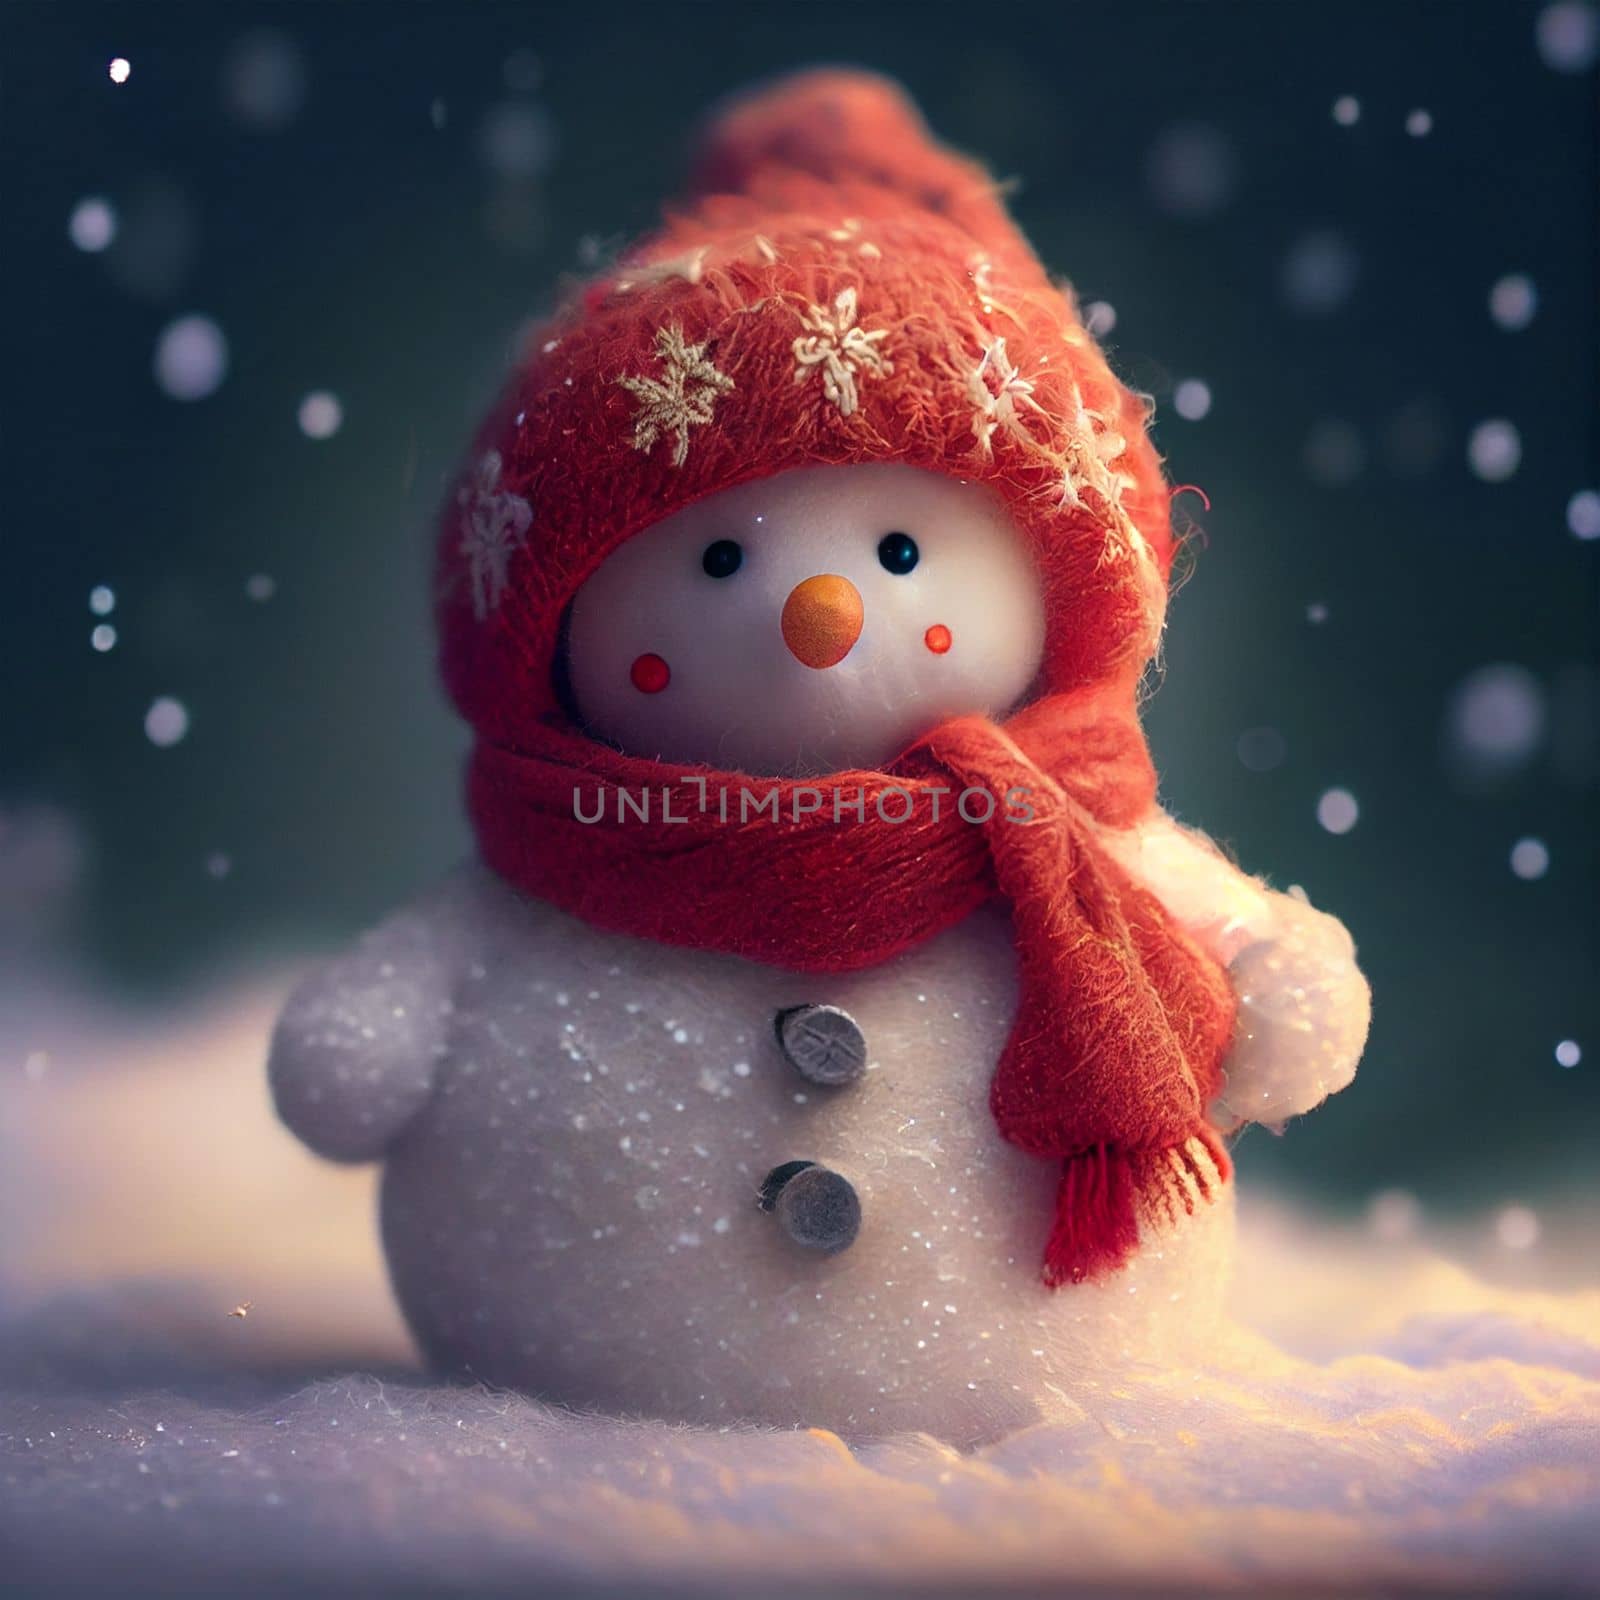 Cute snowman in a red hat and scarf on the snow in 5k